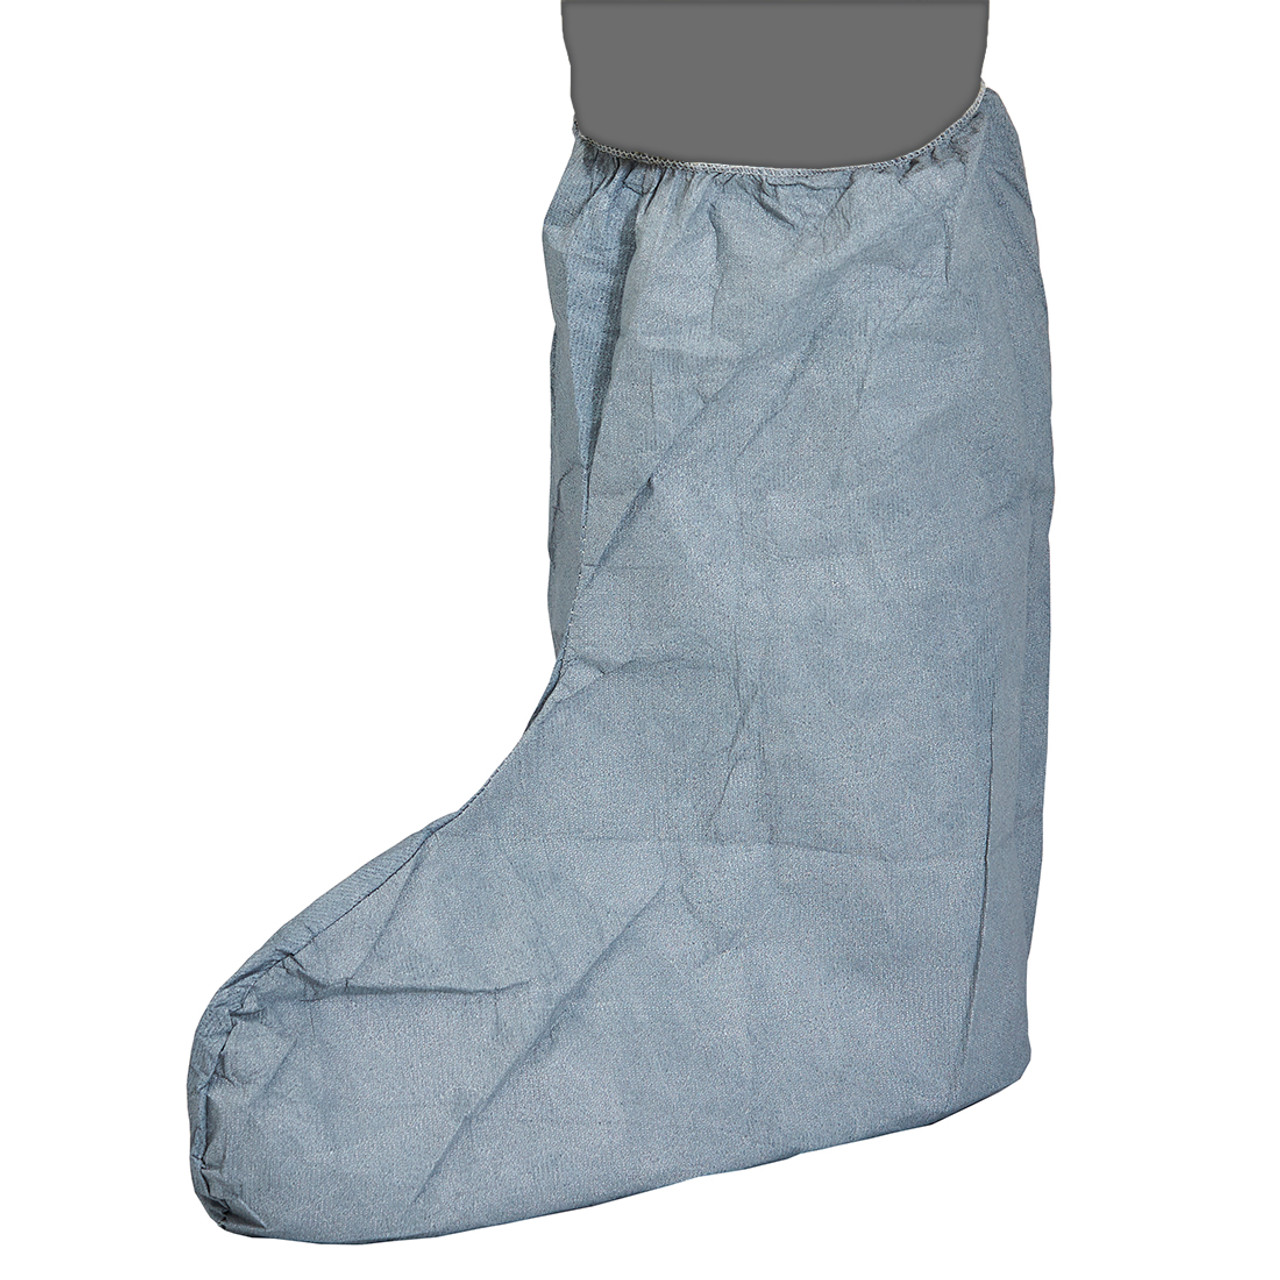 slip resistant boot covers